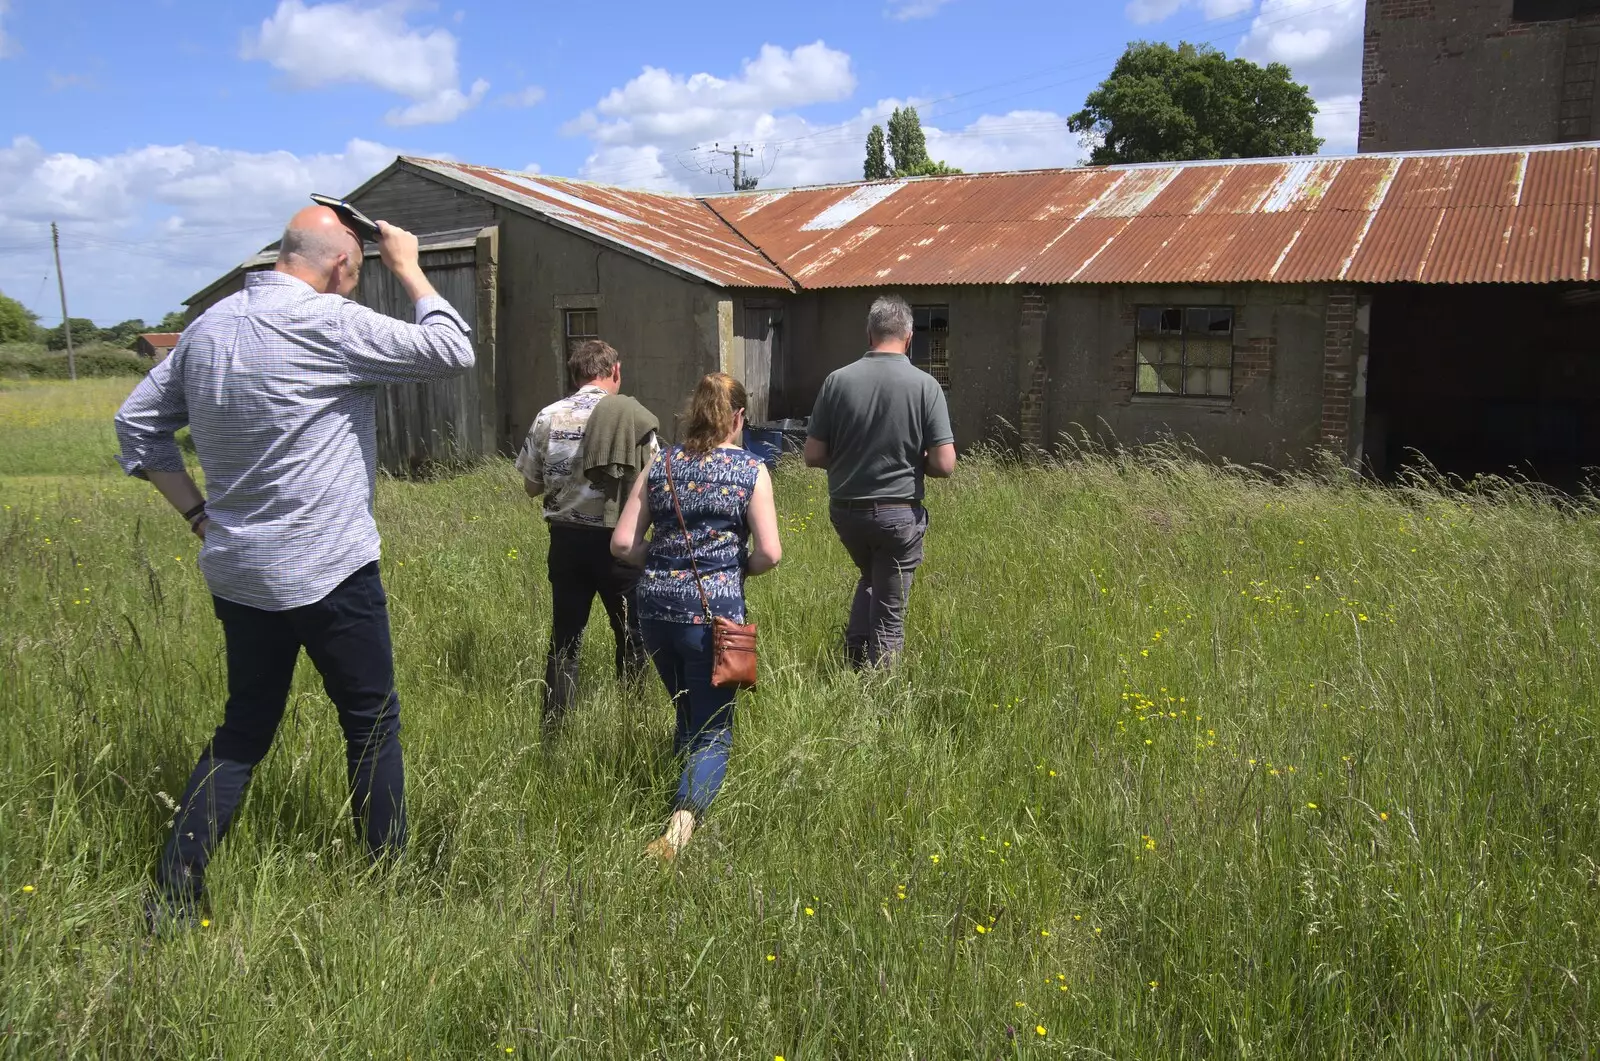 We stride off to another building, from A 1940s Timewarp, Site 4, Bungay Airfield, Flixton, Suffolk - 9th June 2022